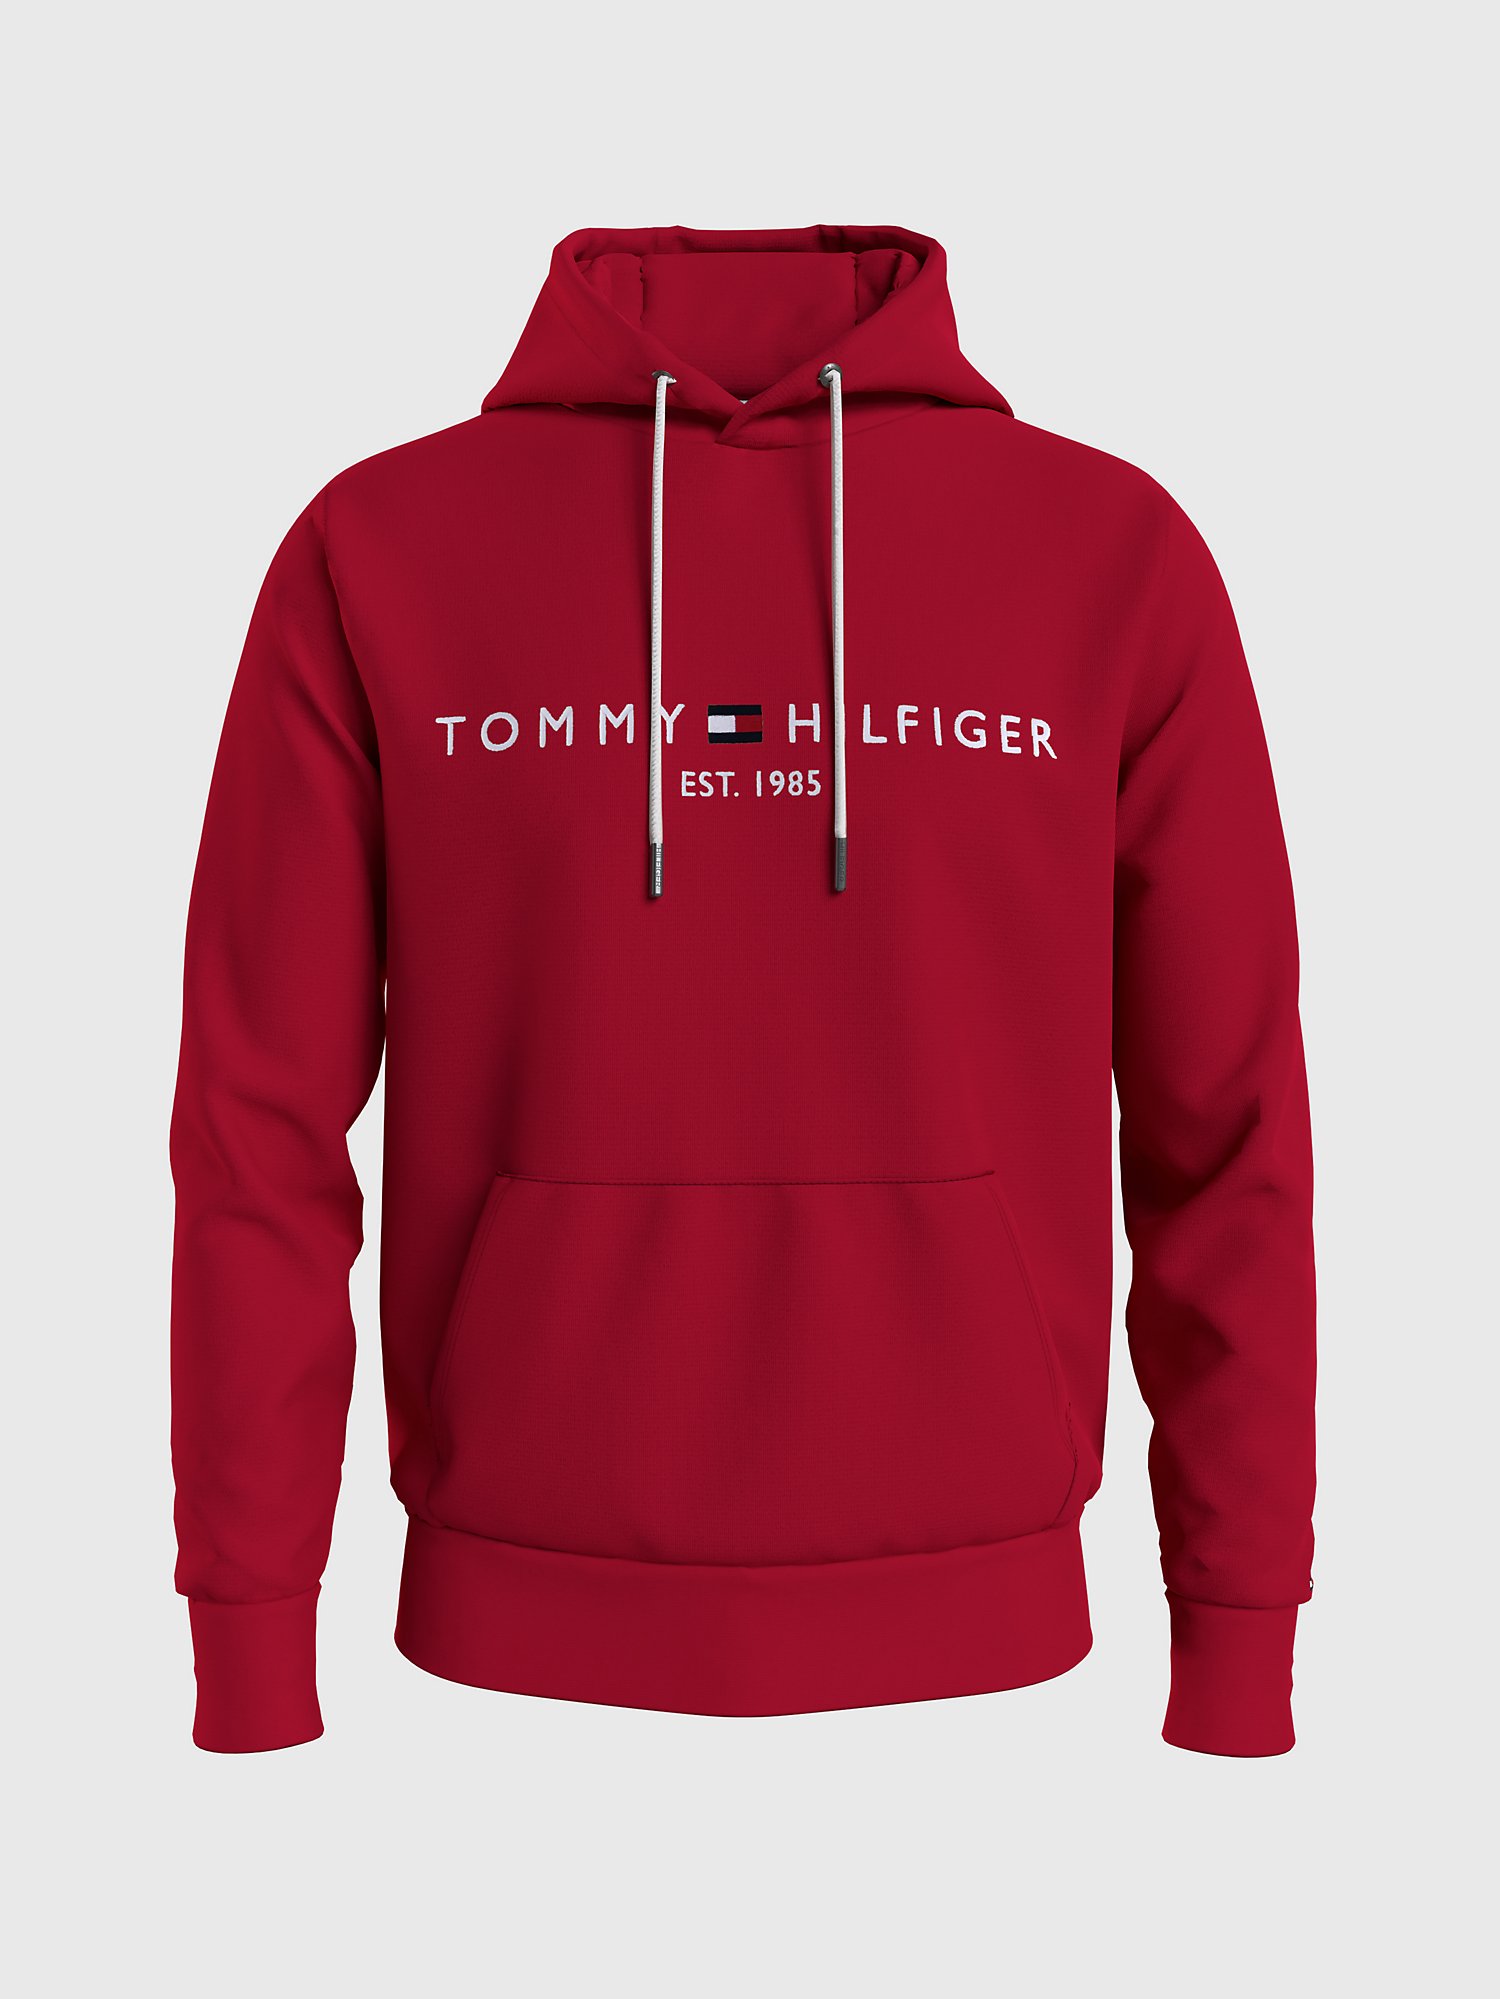 and Tall Tommy Hilfiger Hoodie | Tommy Hilfiger